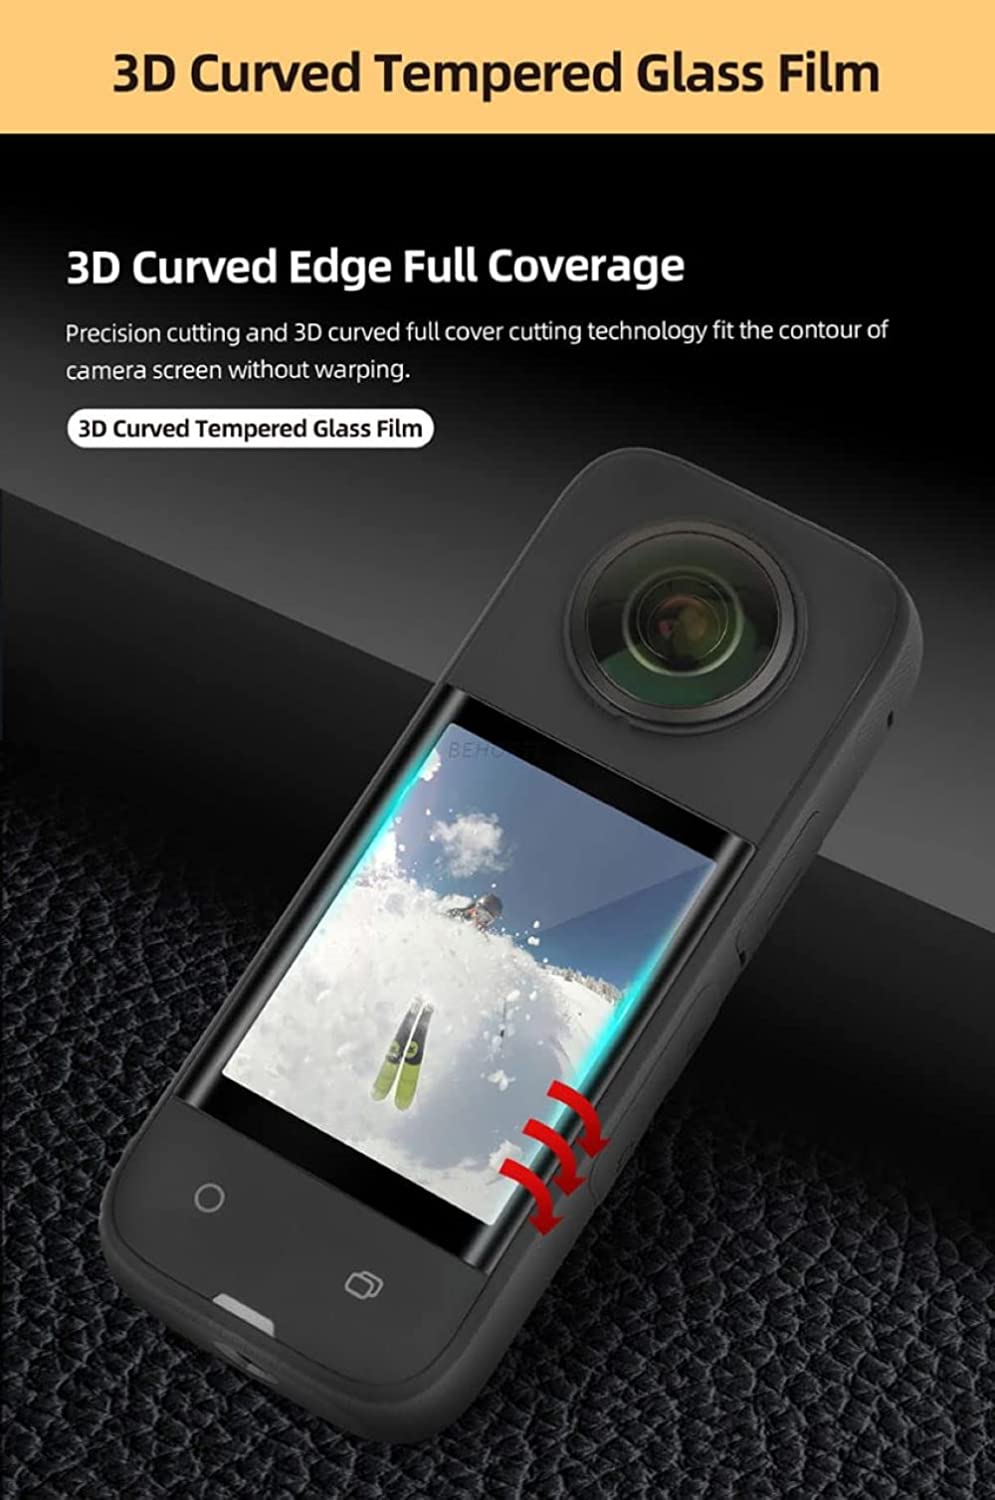 Tempered Glass Film for Insta360 One X3 HD 3D Curved Screen, Dust, Scratch Guard Protective Accessories (2 Films) GetZget